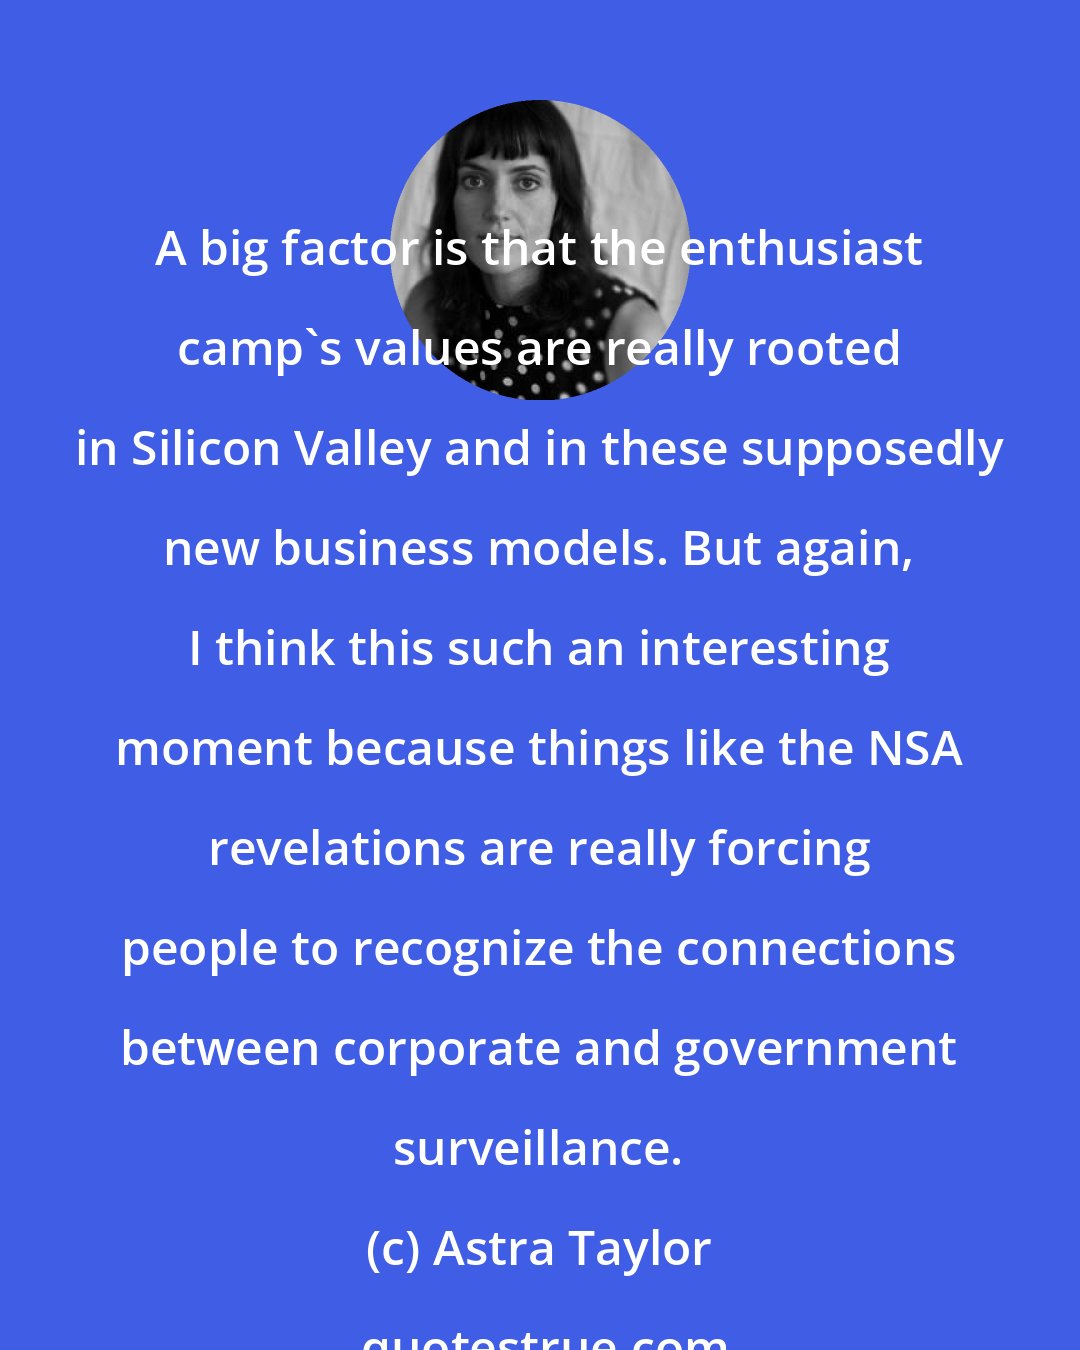 Astra Taylor: A big factor is that the enthusiast camp's values are really rooted in Silicon Valley and in these supposedly new business models. But again, I think this such an interesting moment because things like the NSA revelations are really forcing people to recognize the connections between corporate and government surveillance.